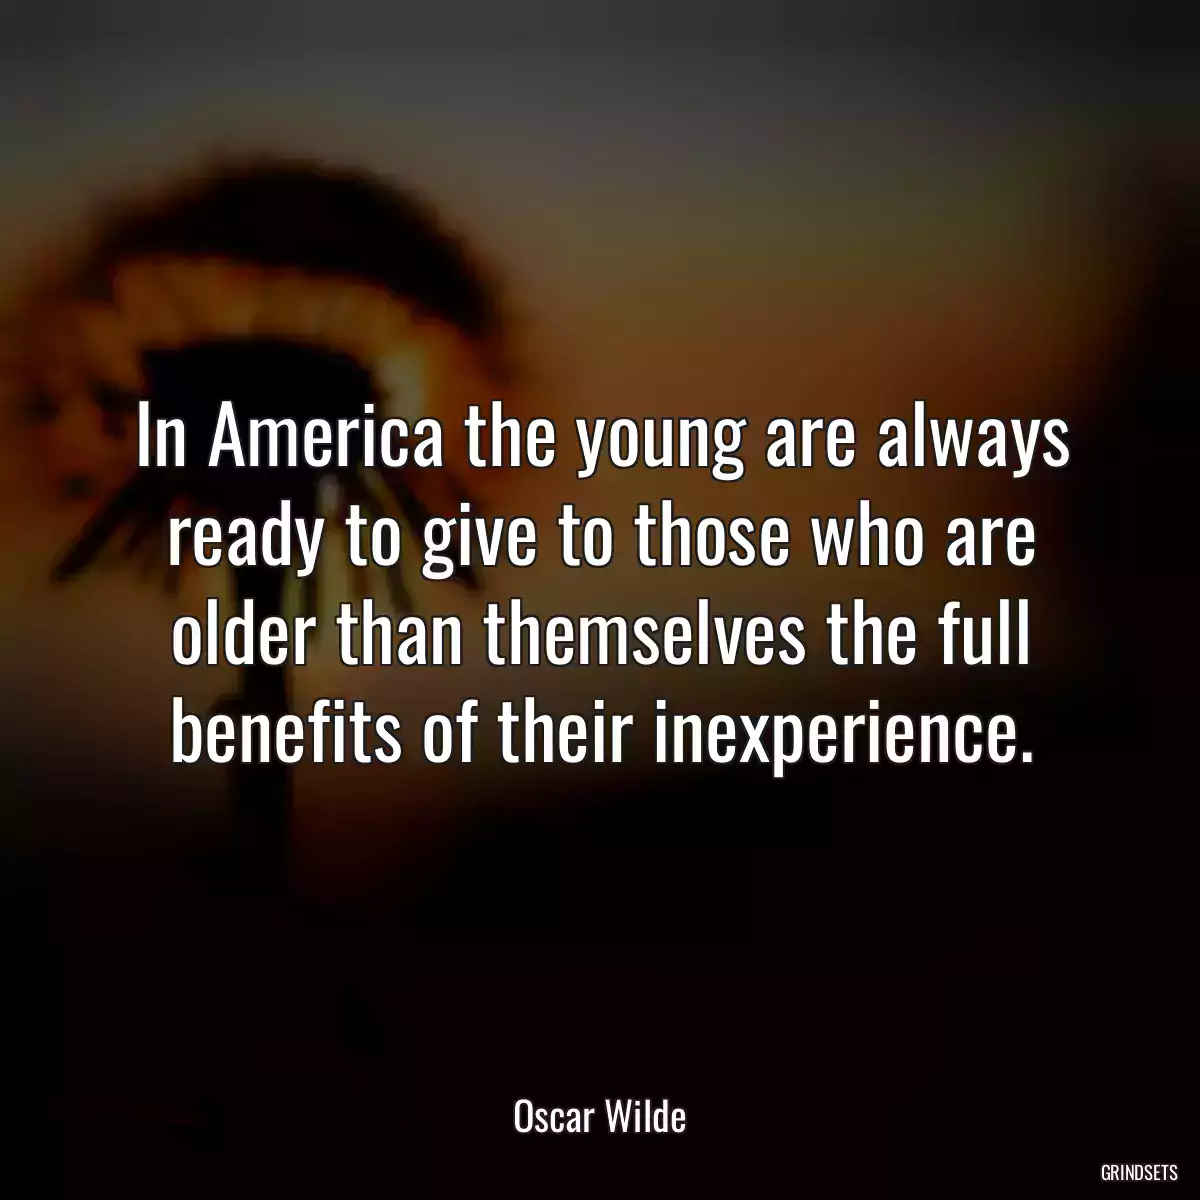 In America the young are always ready to give to those who are older than themselves the full benefits of their inexperience.